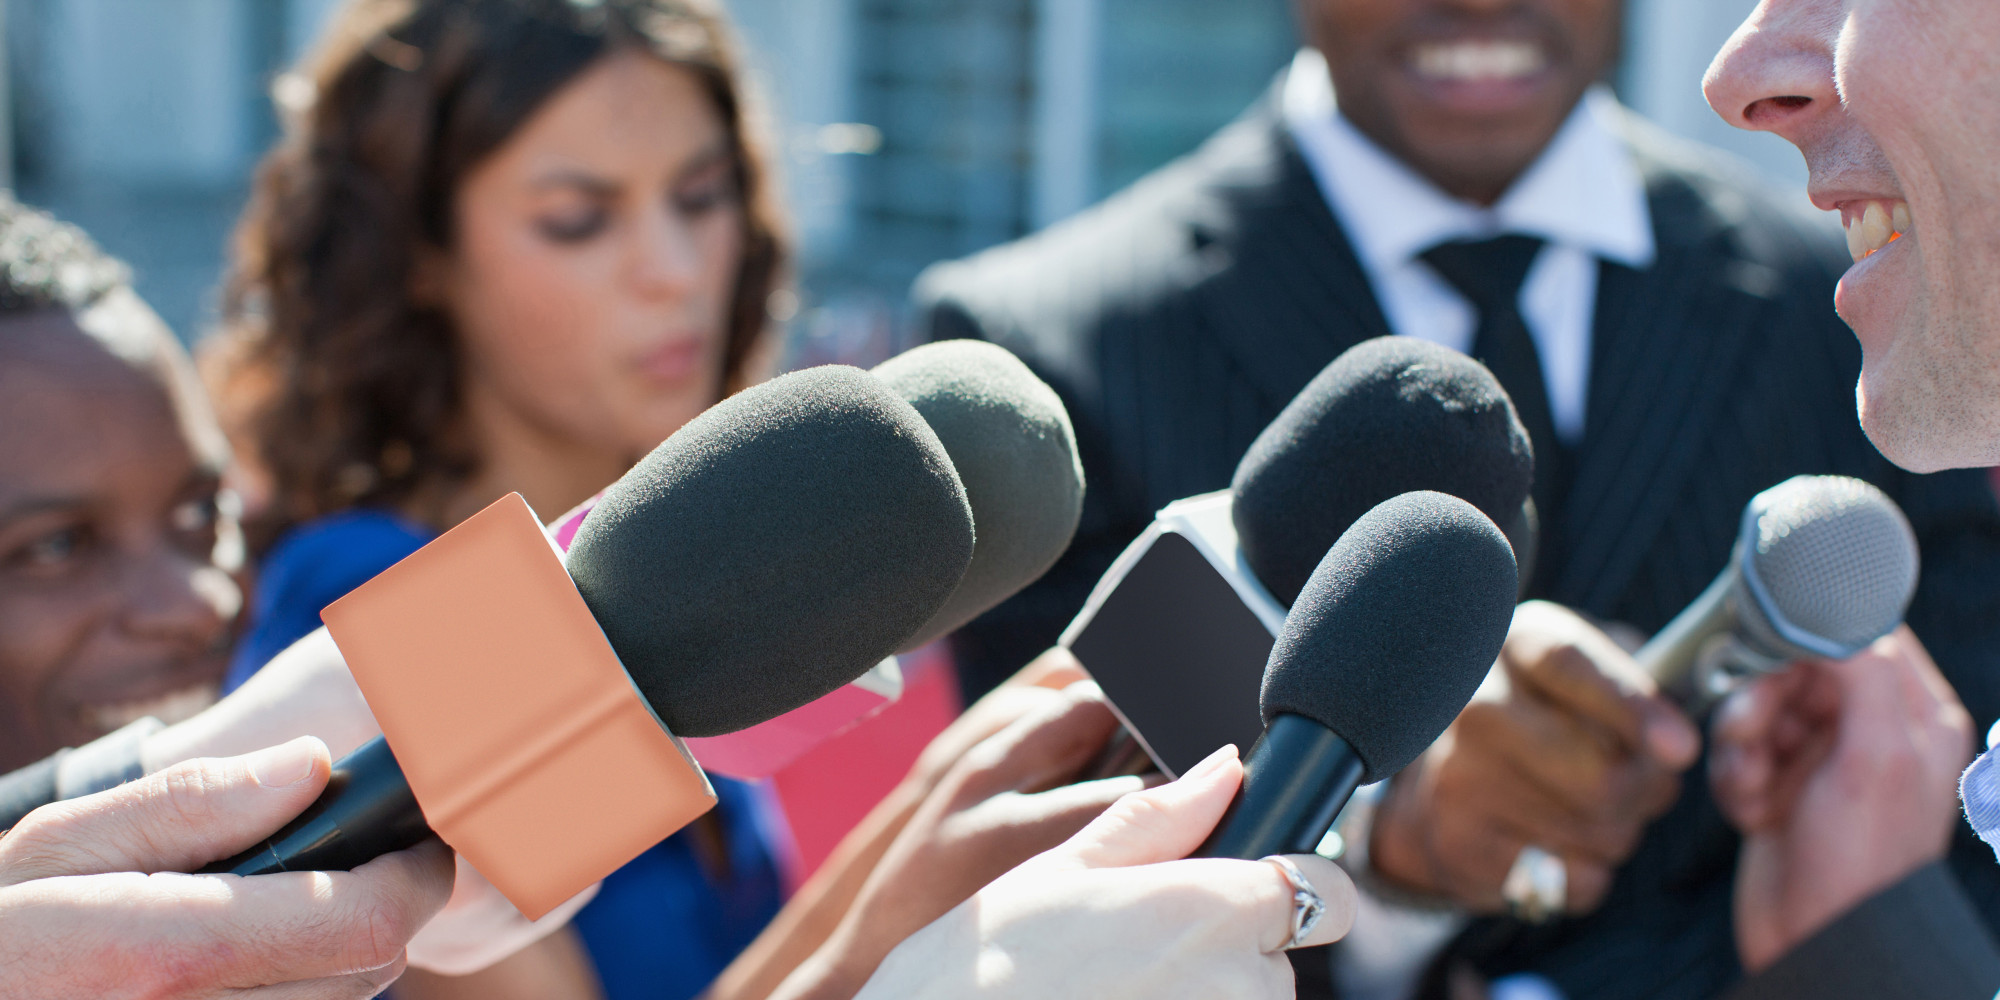 How to Get Your Business on Local News HuffPost